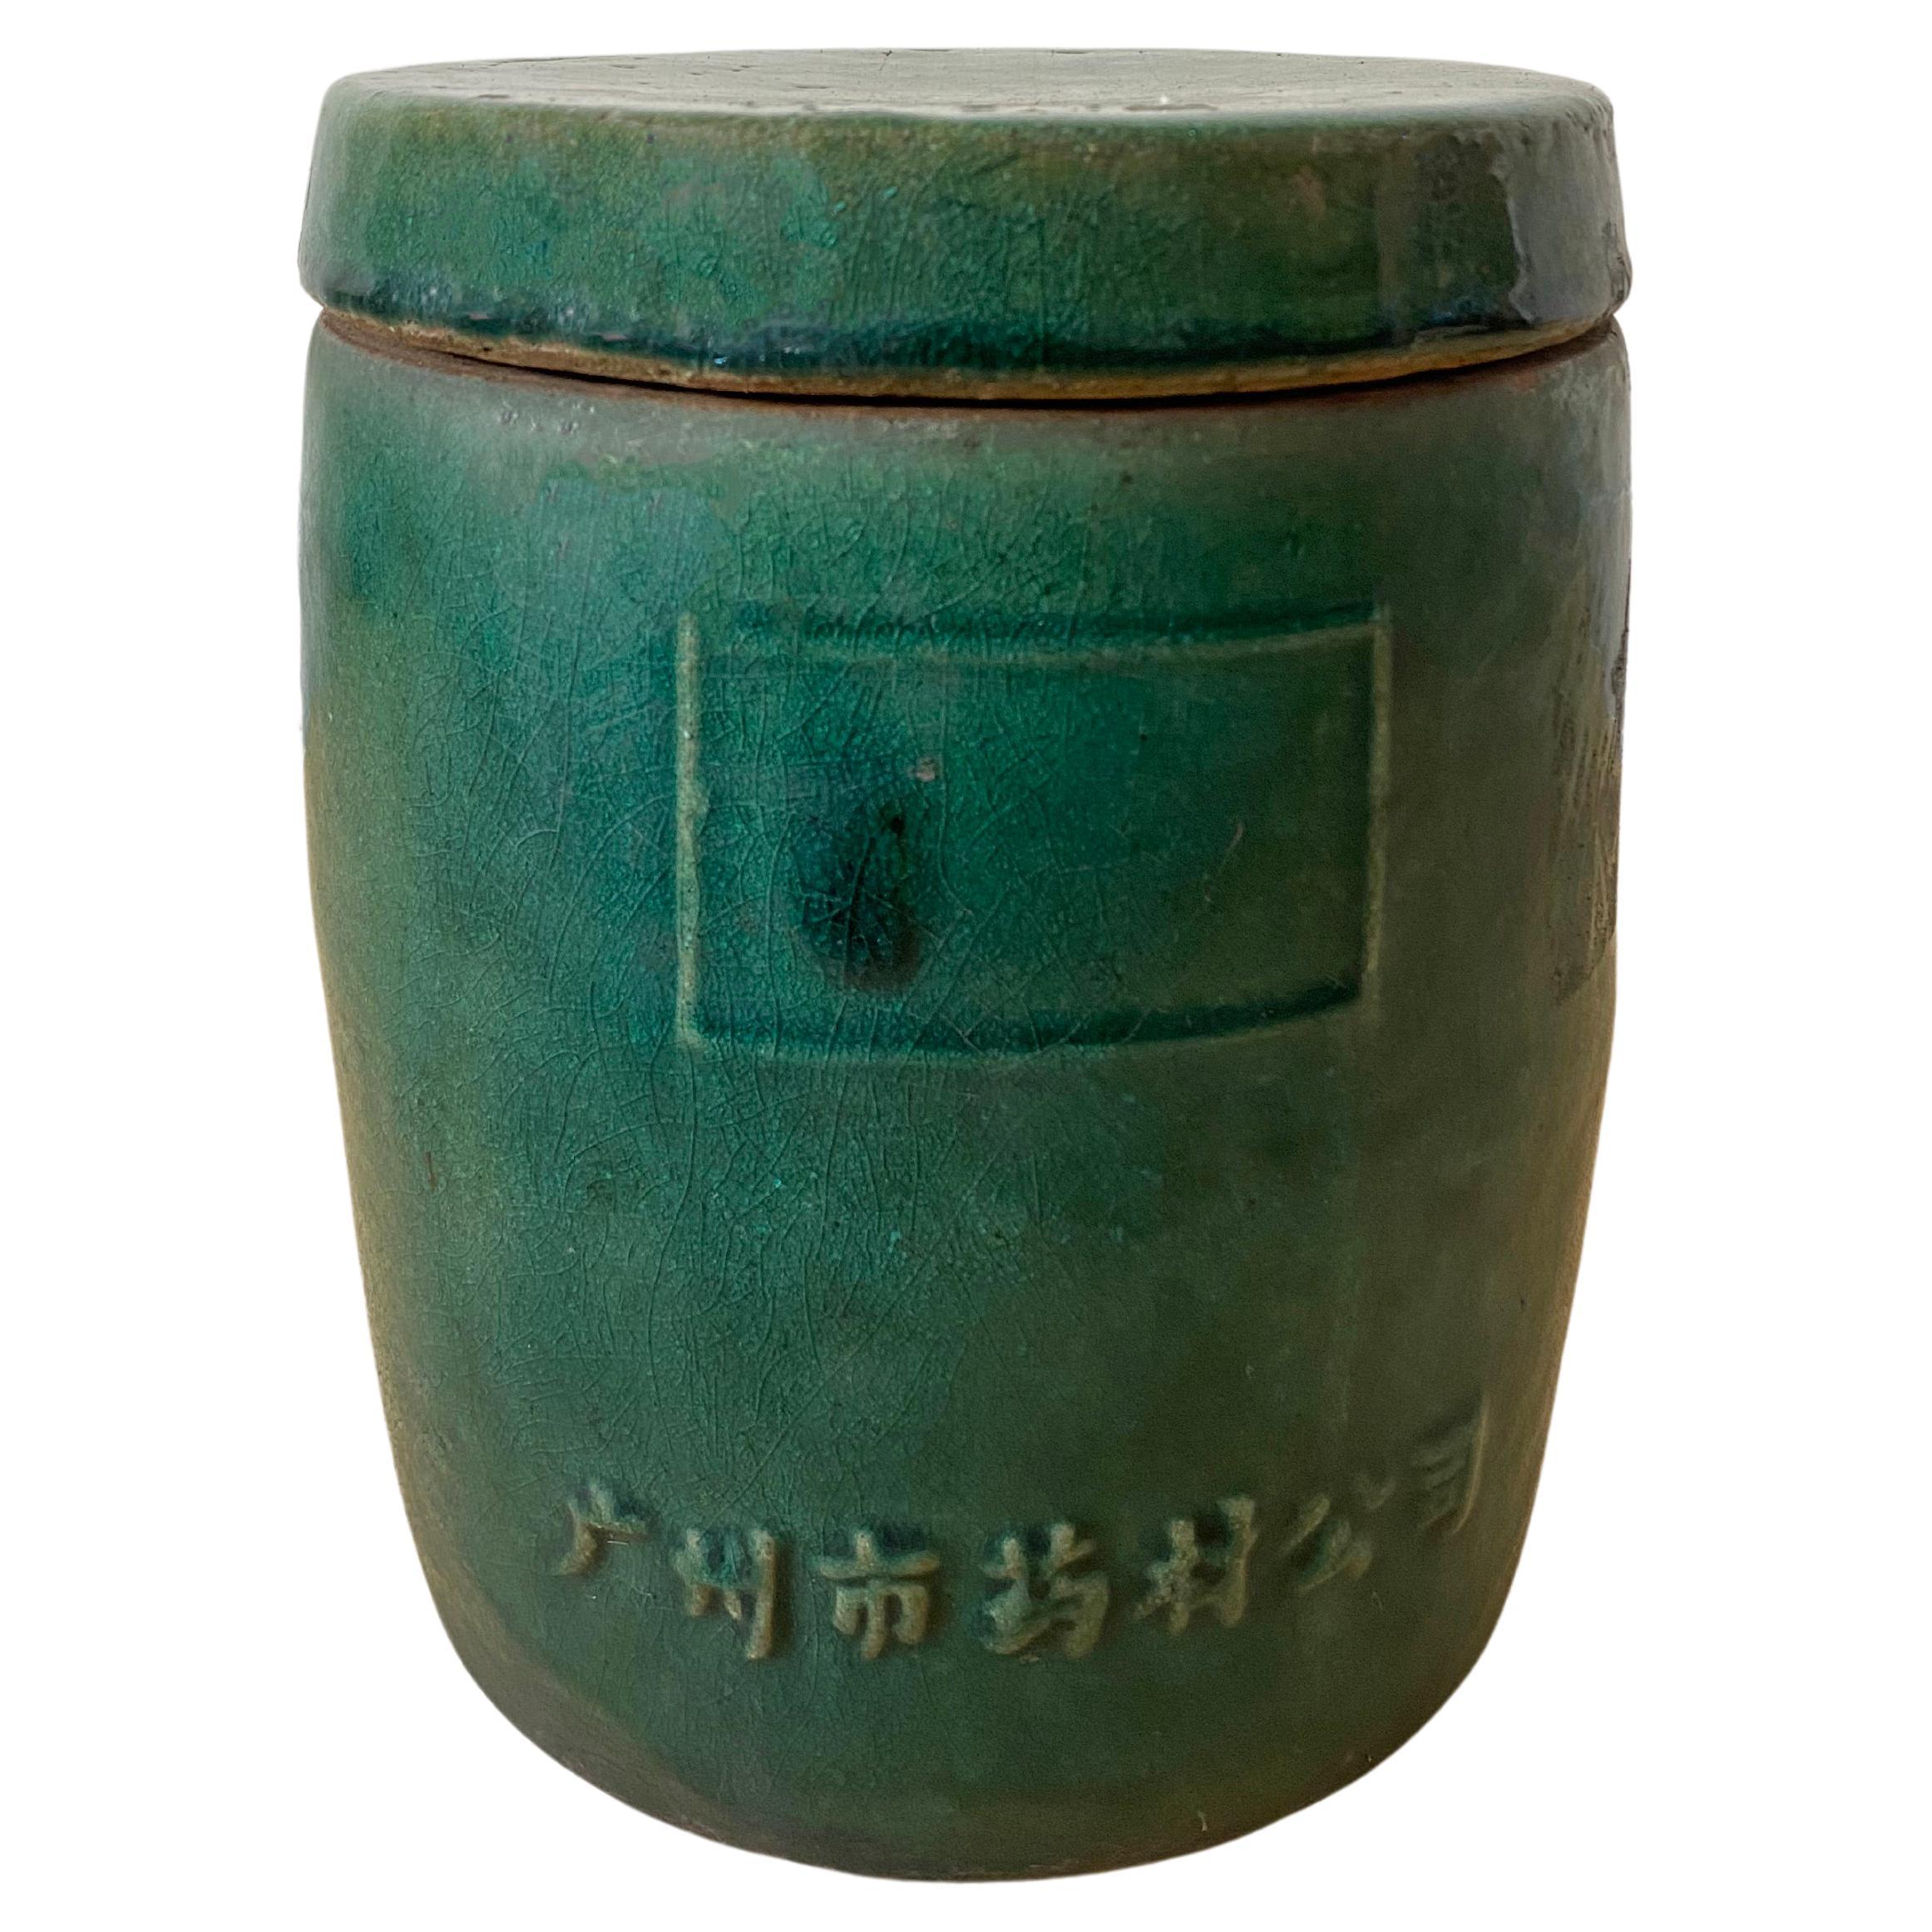 Chinese Ceramic Guangzhou Medicine Company 'Apothecary' Jar, Early 20th Century For Sale